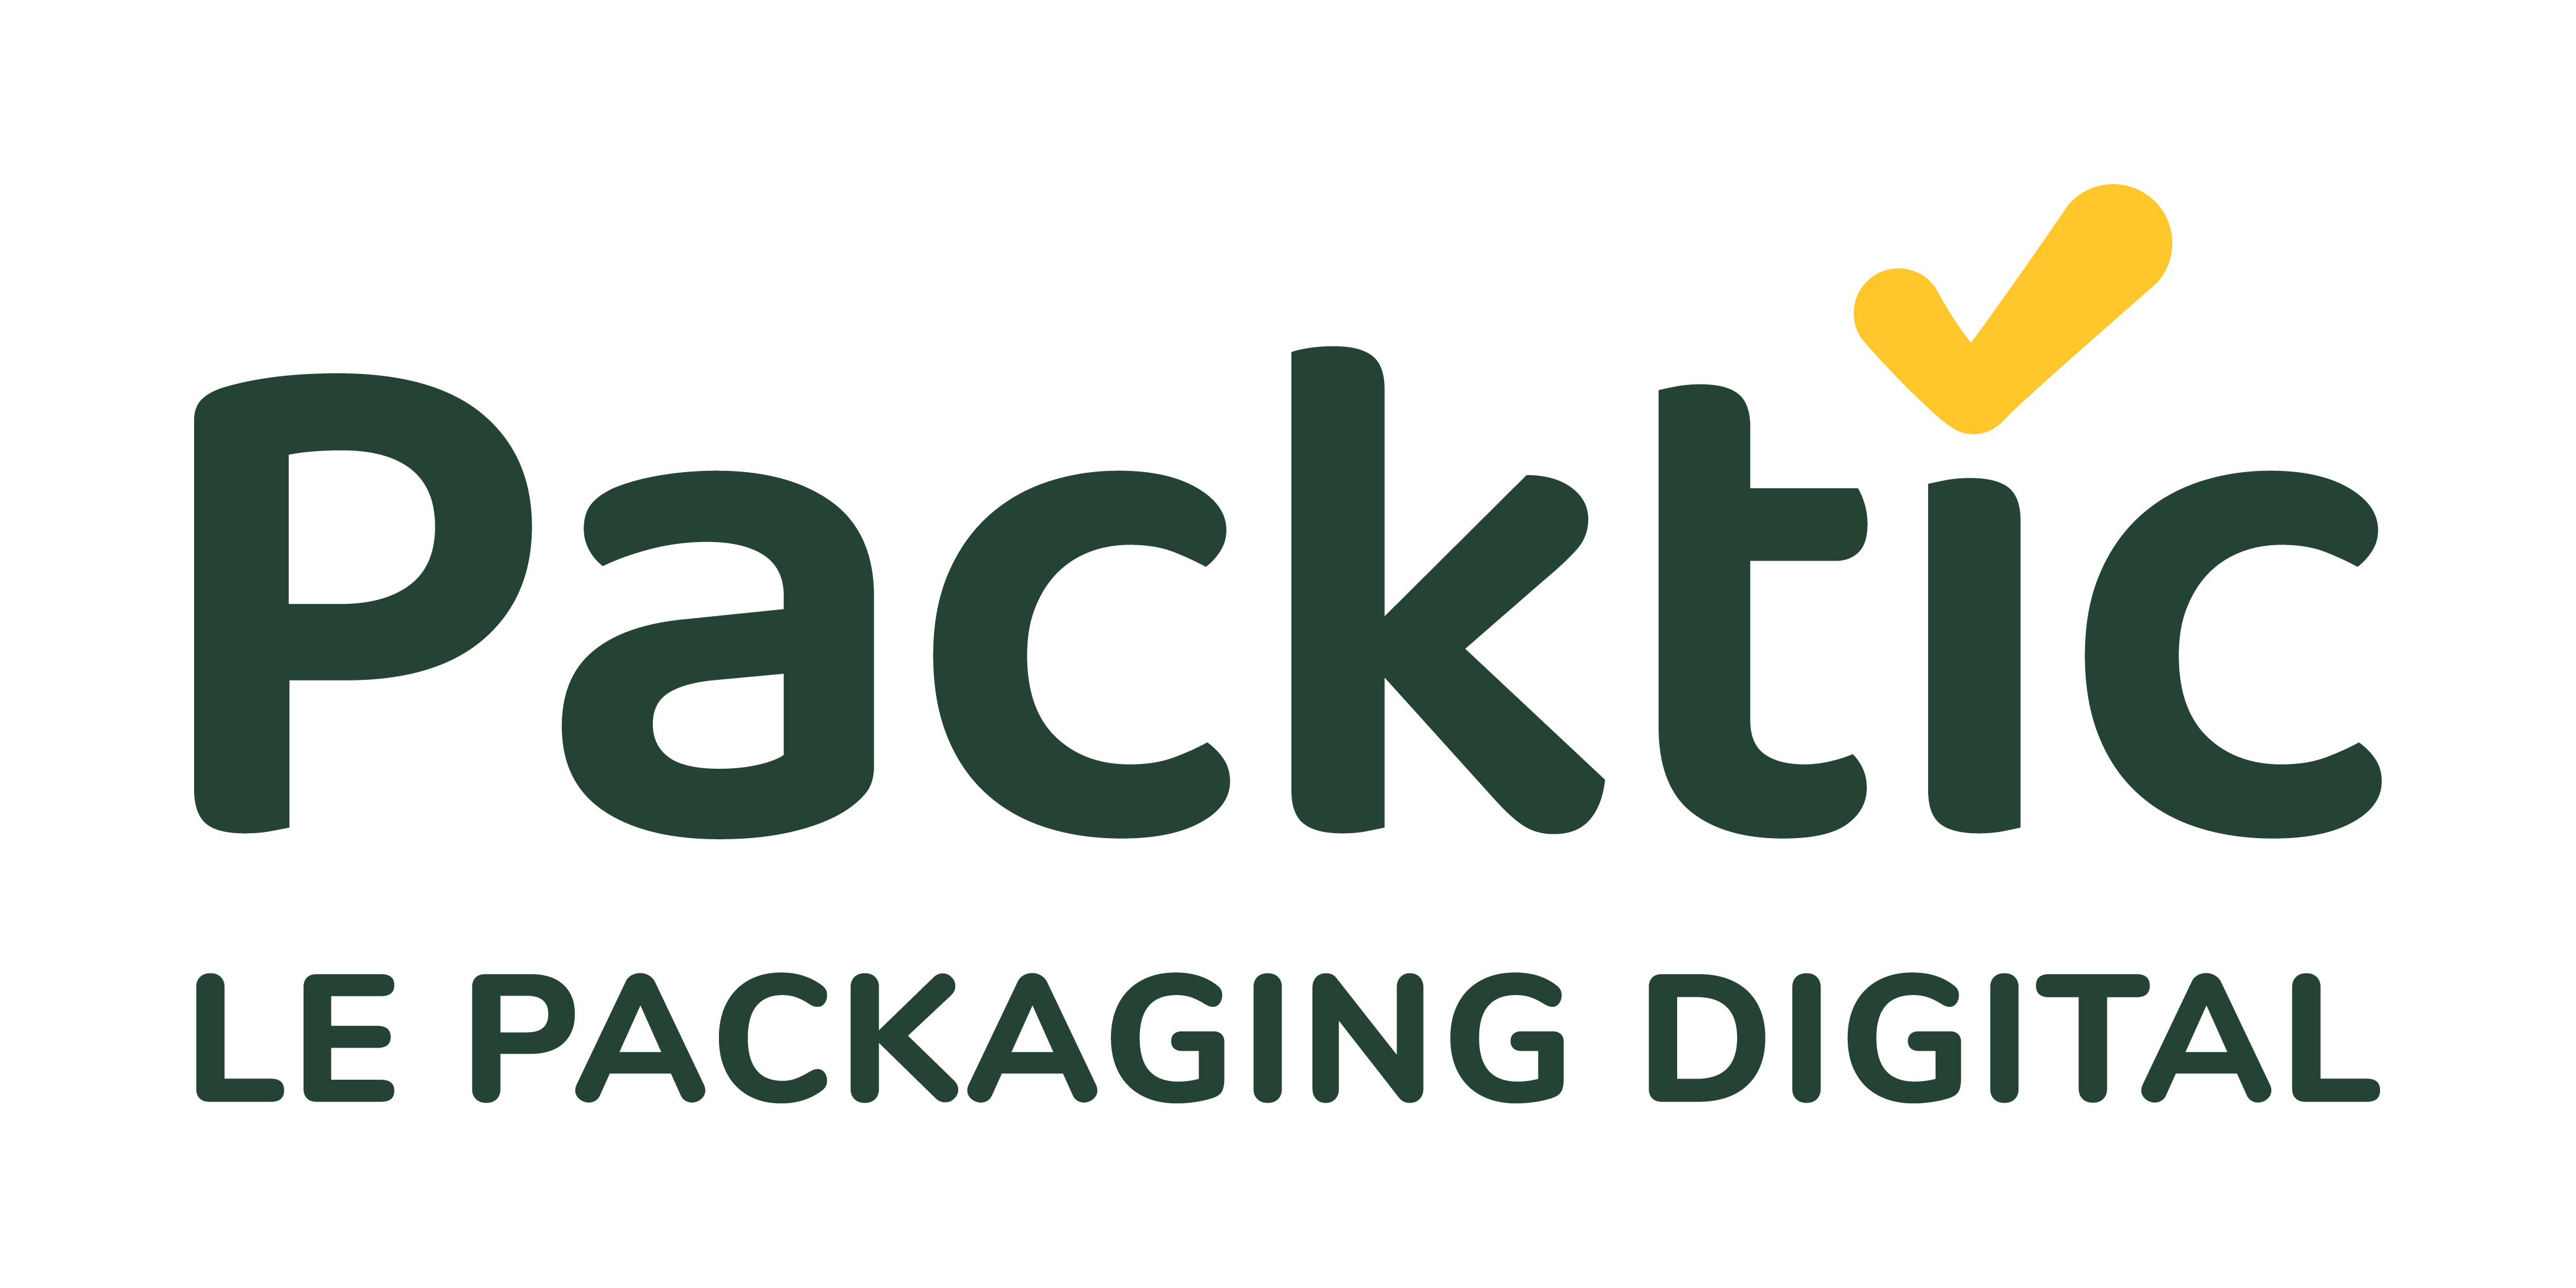 PACKTIC